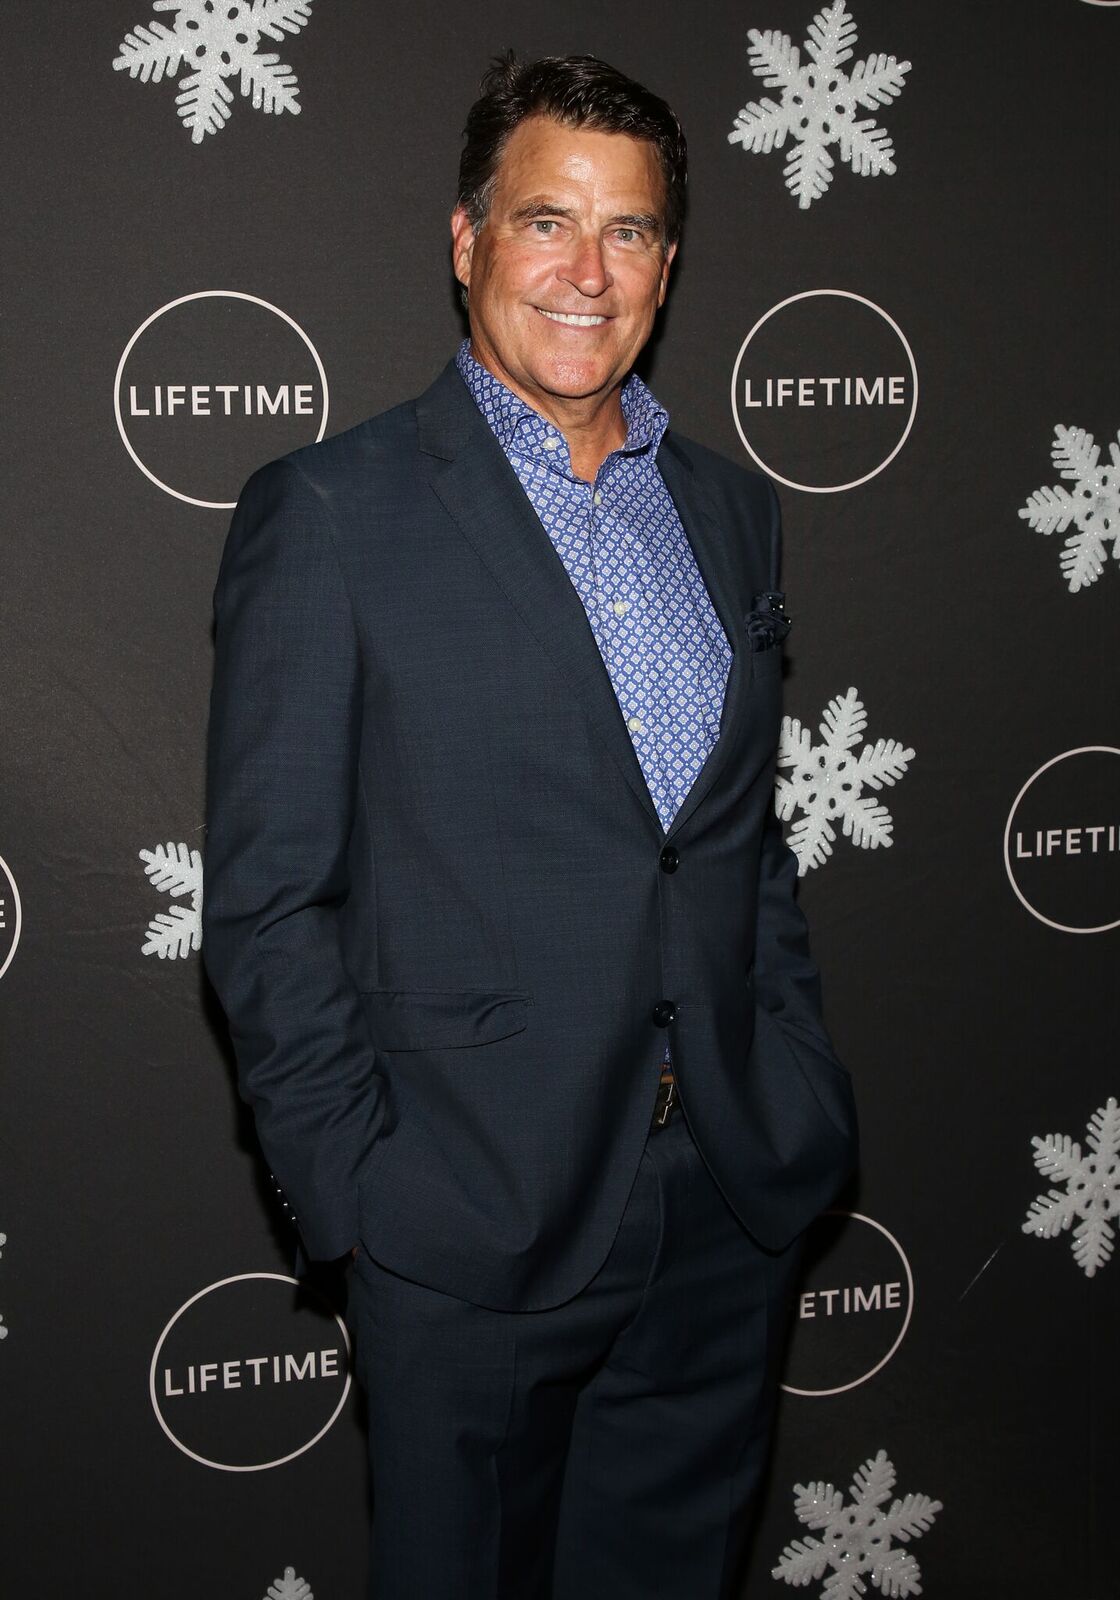 Ted McGinley at the "It's A Wonderful Lifetime" Holiday Party in Los Angeles in, 2019 | Source: Getty Images